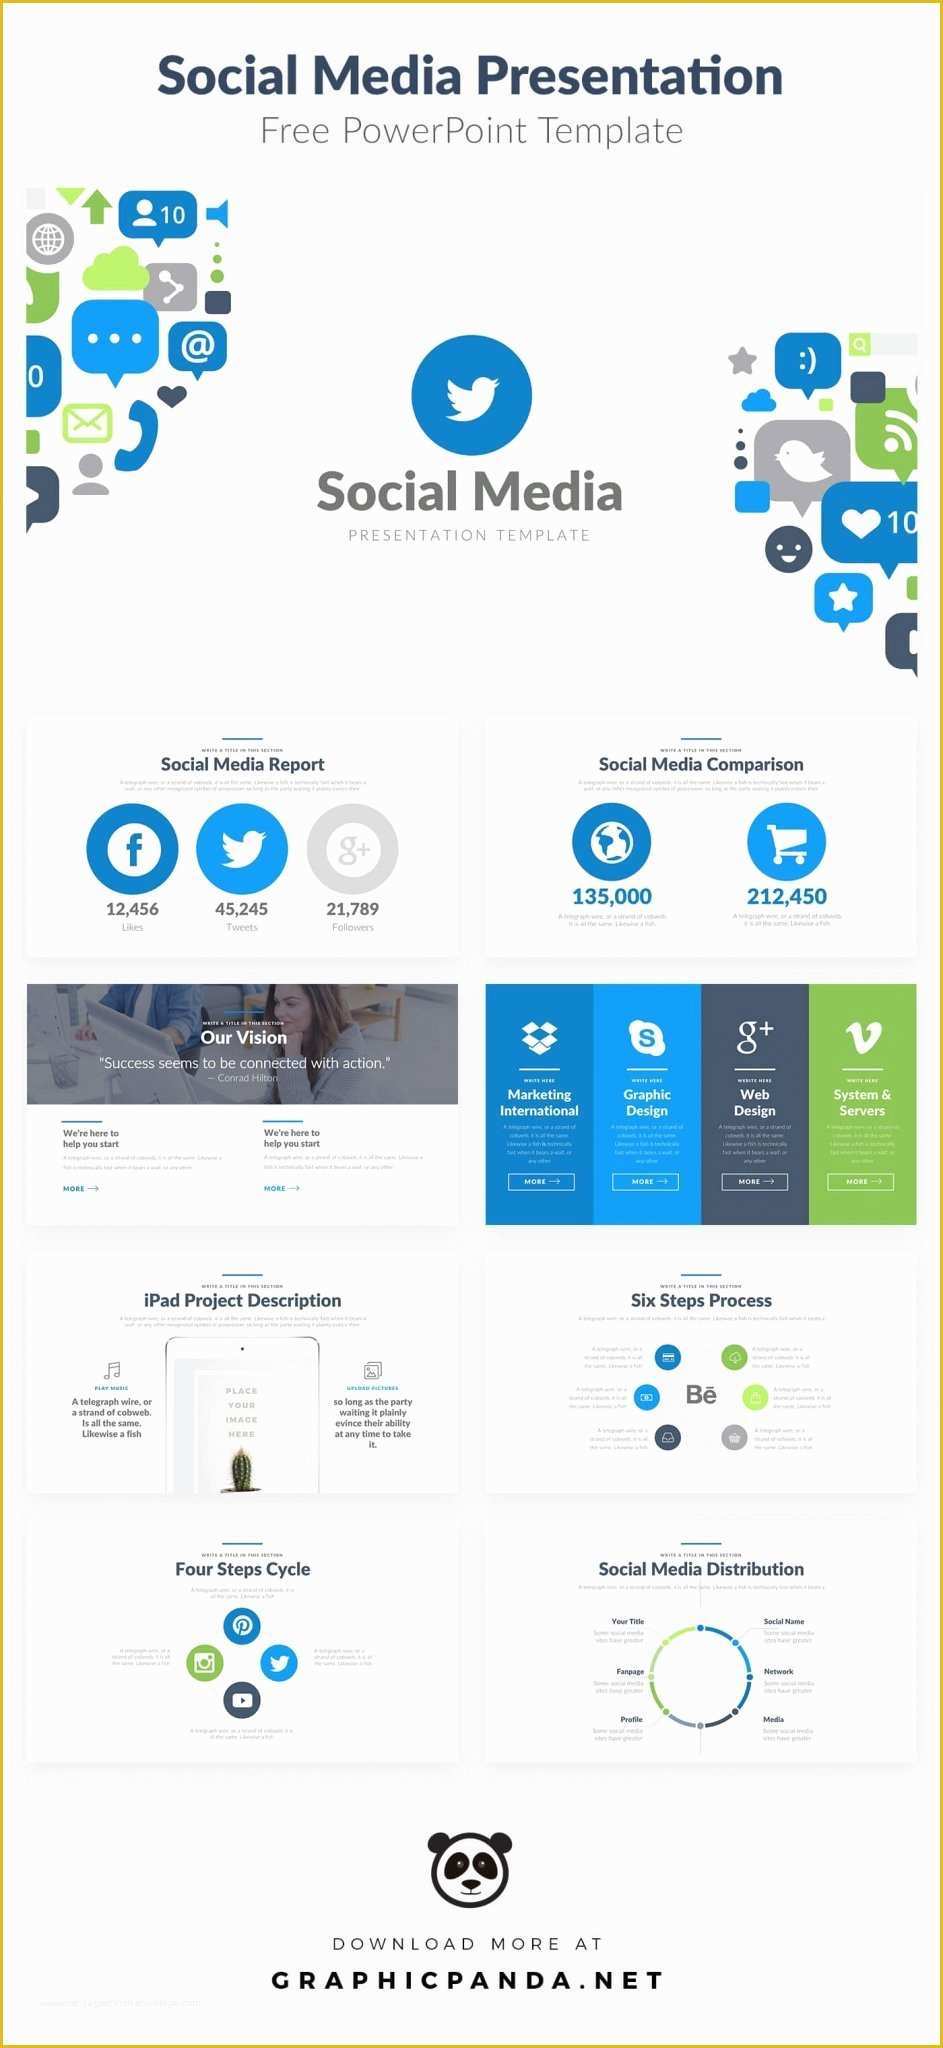 Social Media Templates Free Of 10 Free social Media Slides Templates for Microsoft Powerpoint